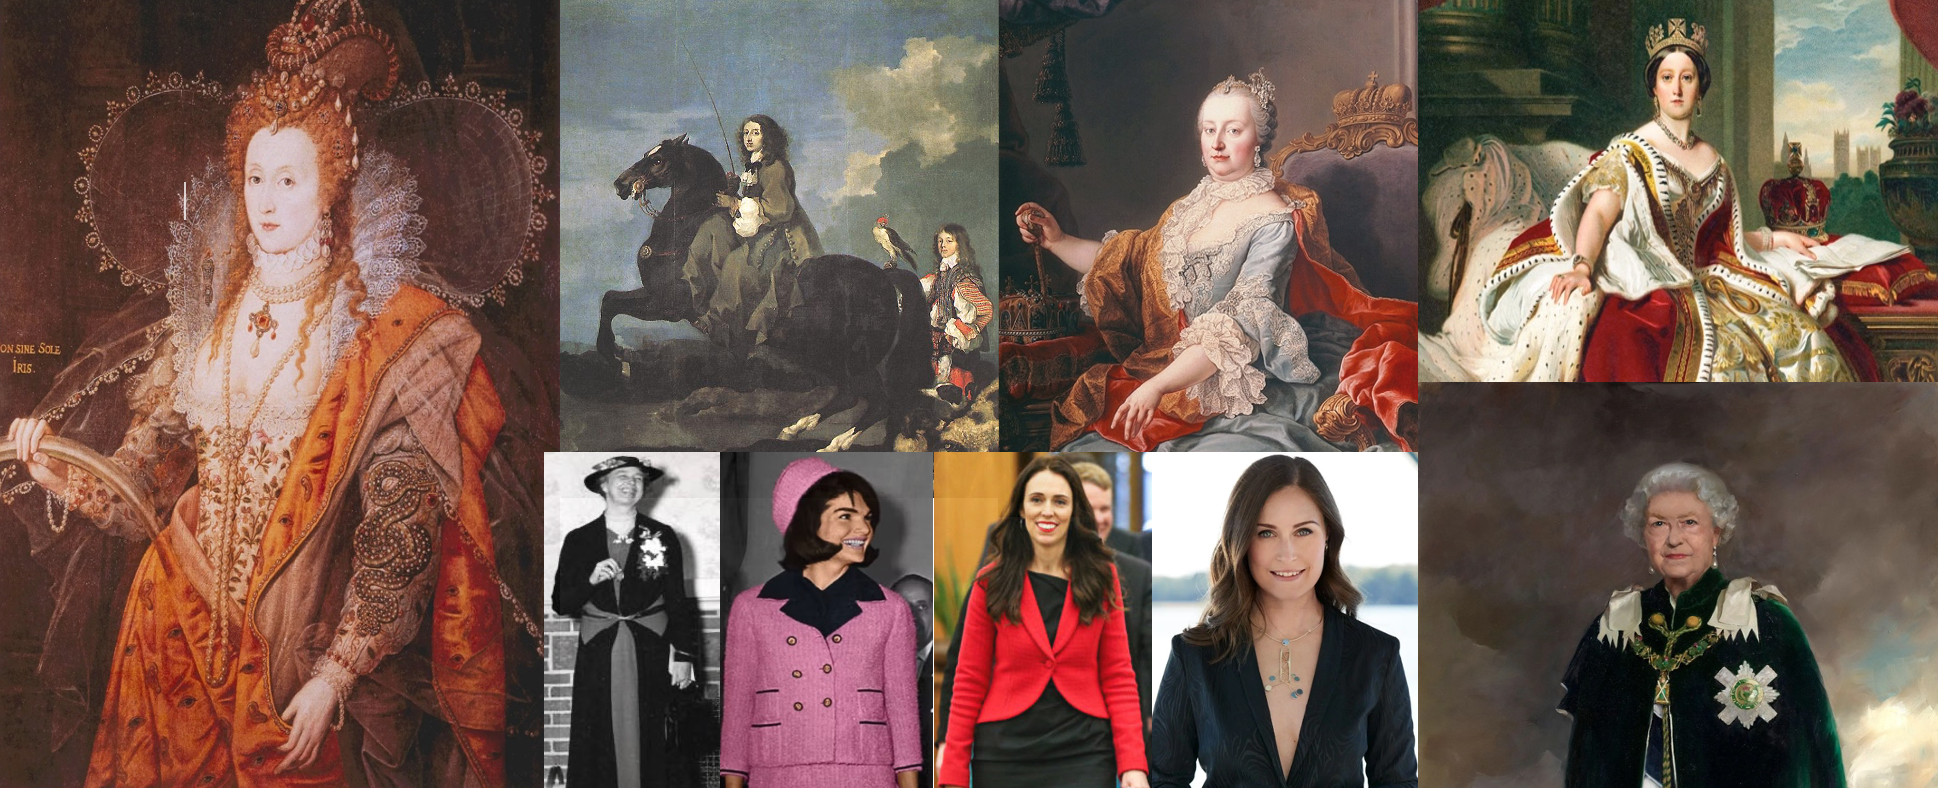 Collage of historical and modern women.